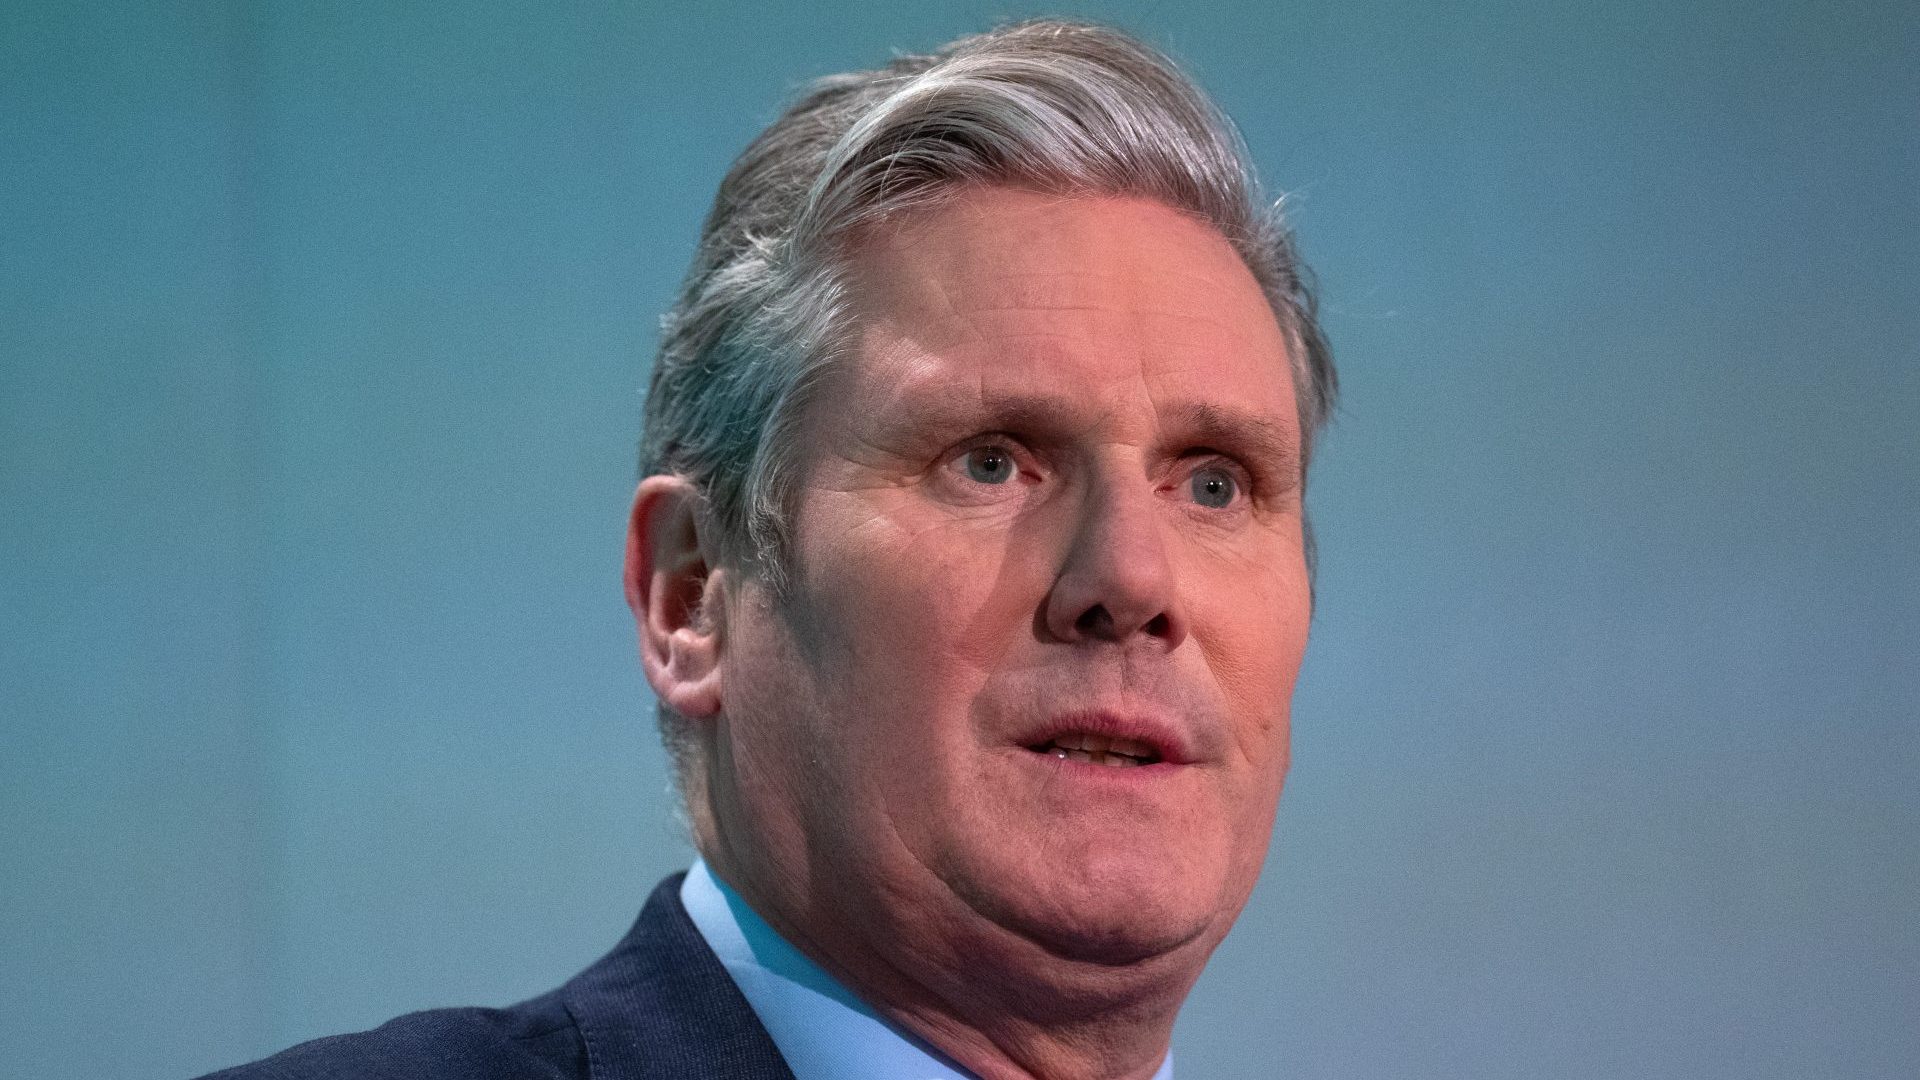 Britain's opposition Labour Party leader Keir Starmer speaks at the Queen Elizabeth II Conference Centre. Photo: Carl Court/Getty Images